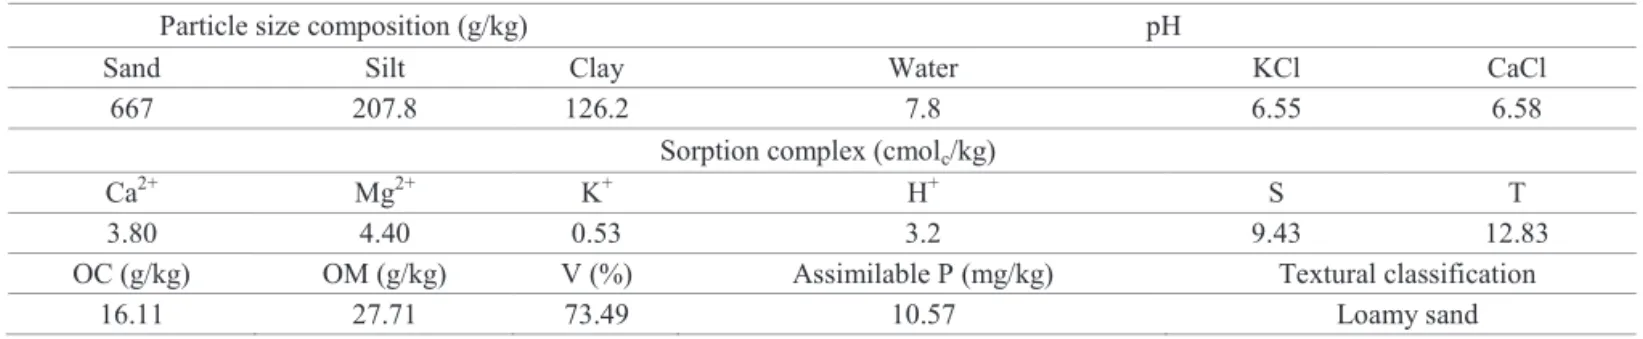 Table 1. Physicochemical characteristics of the soil used for emergence and initial growth of Copernicia prunifera seedlings.